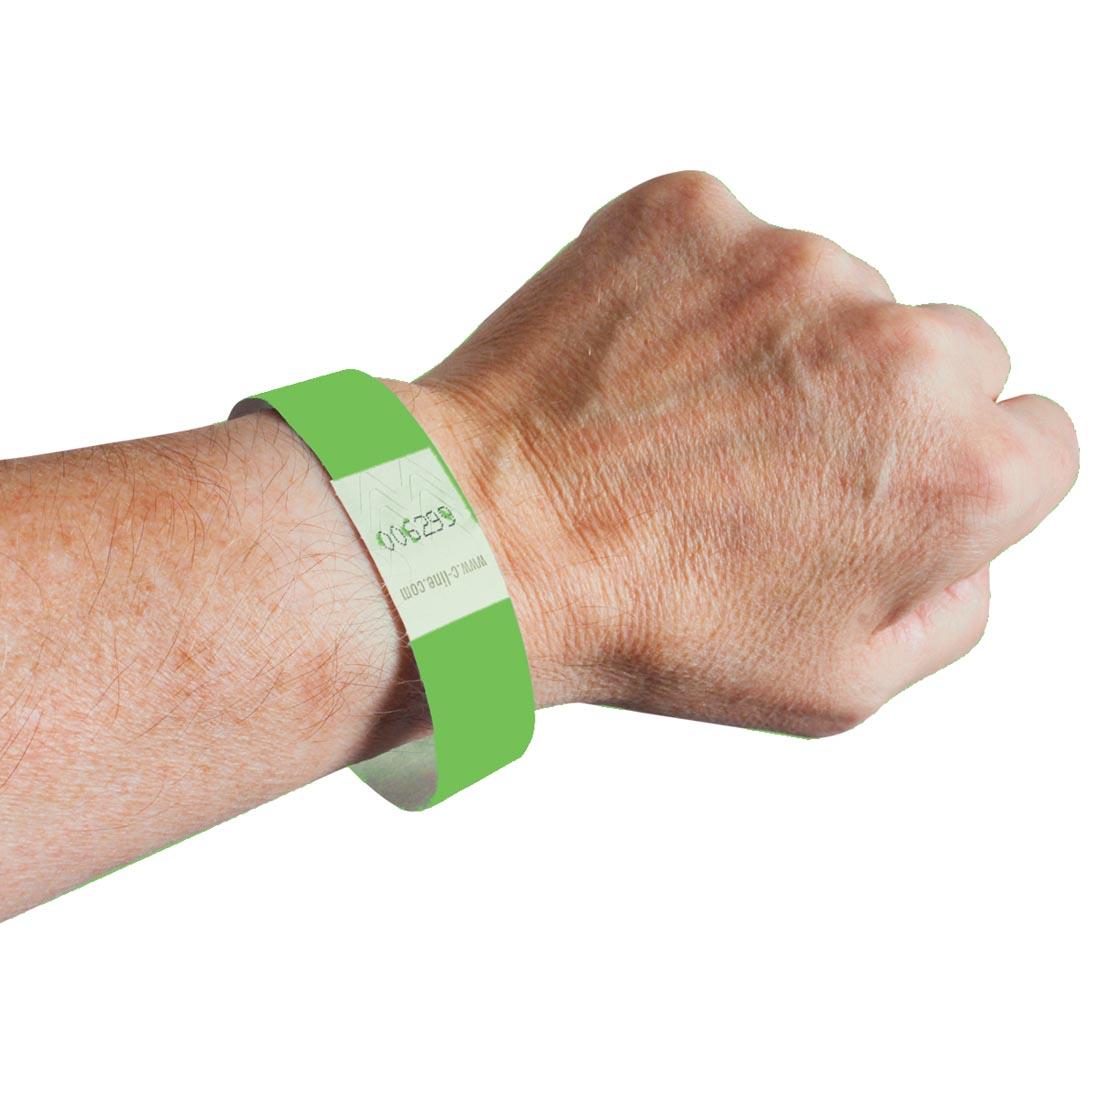 Green DuPont Tyvek Security Wristband on a wrist